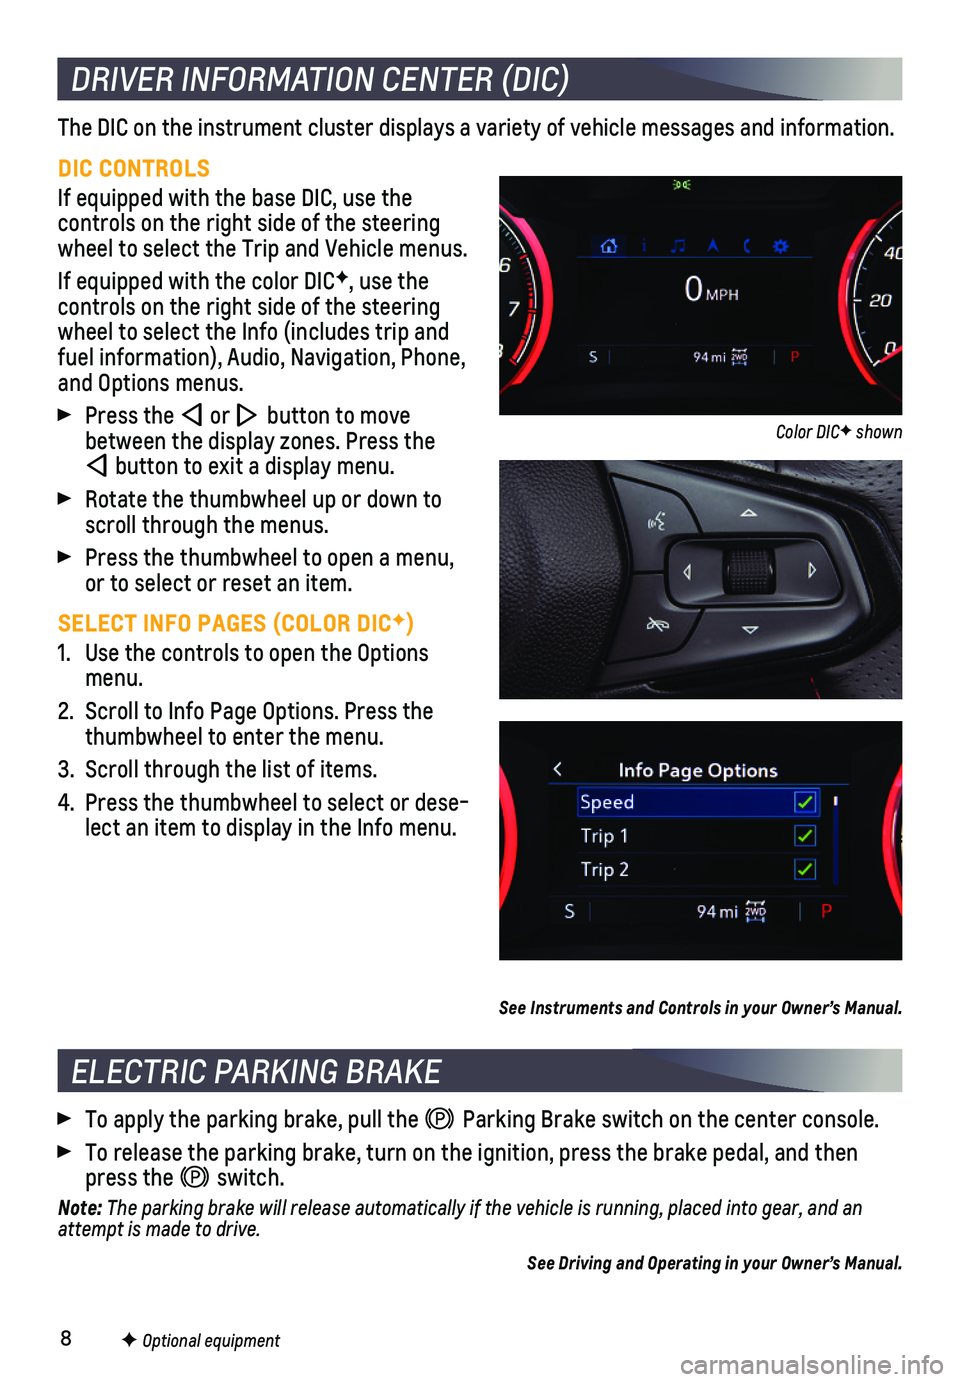 CHEVROLET TRAILBLAZER 2021  Get To Know Guide 8F Optional equipment
DRIVER INFORMATION CENTER (DIC)
The DIC on the instrument cluster displays a variety of vehicle messages\
 and information.
DIC CONTROLS
If equipped with the base DIC, use the  
